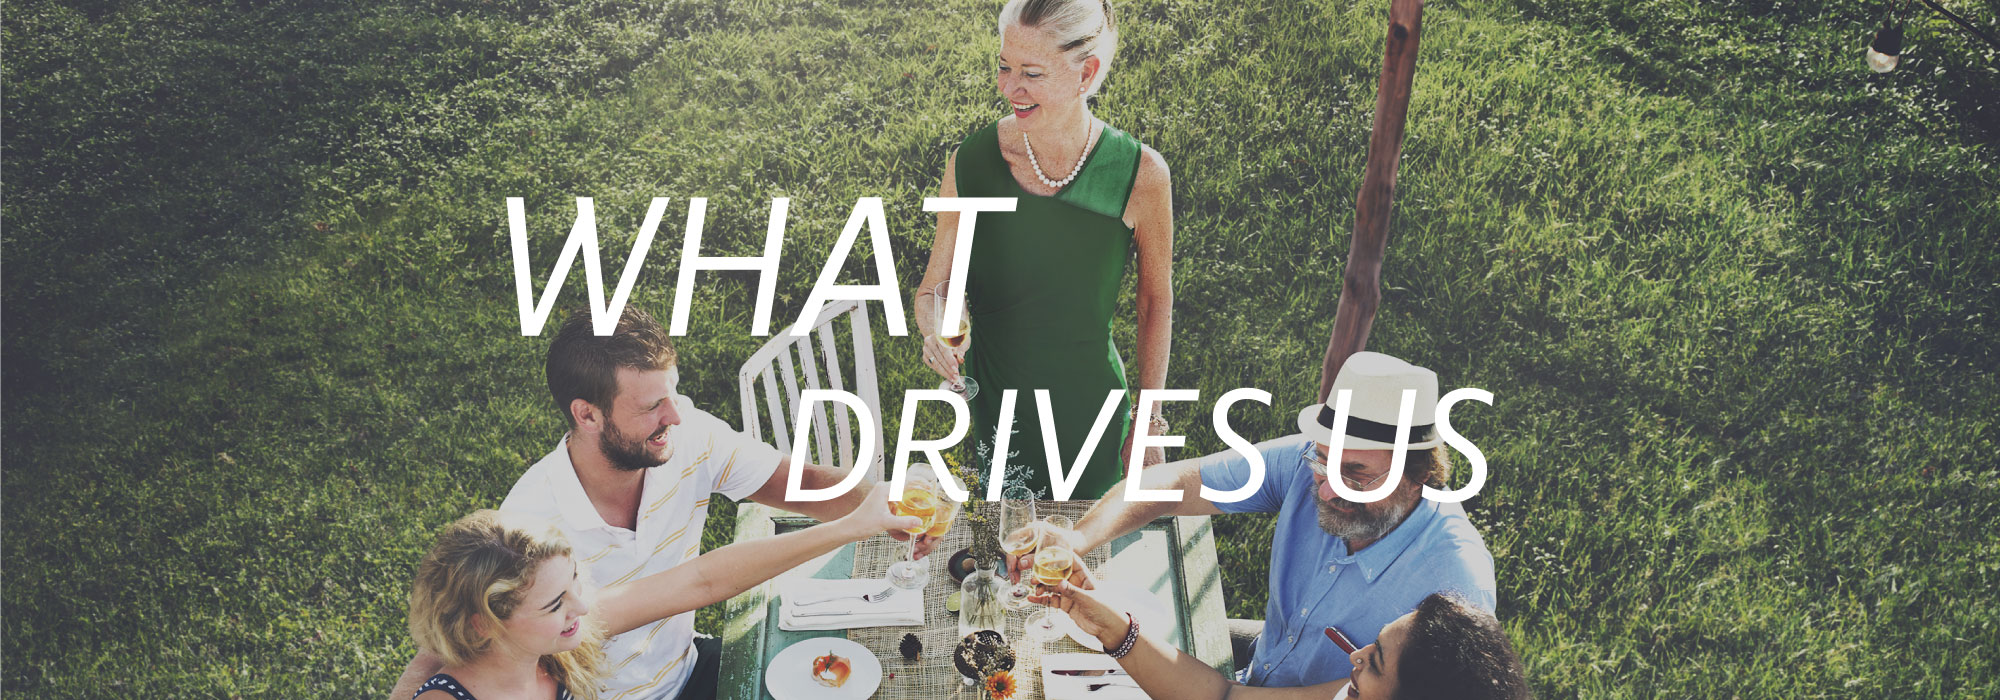 What drives us